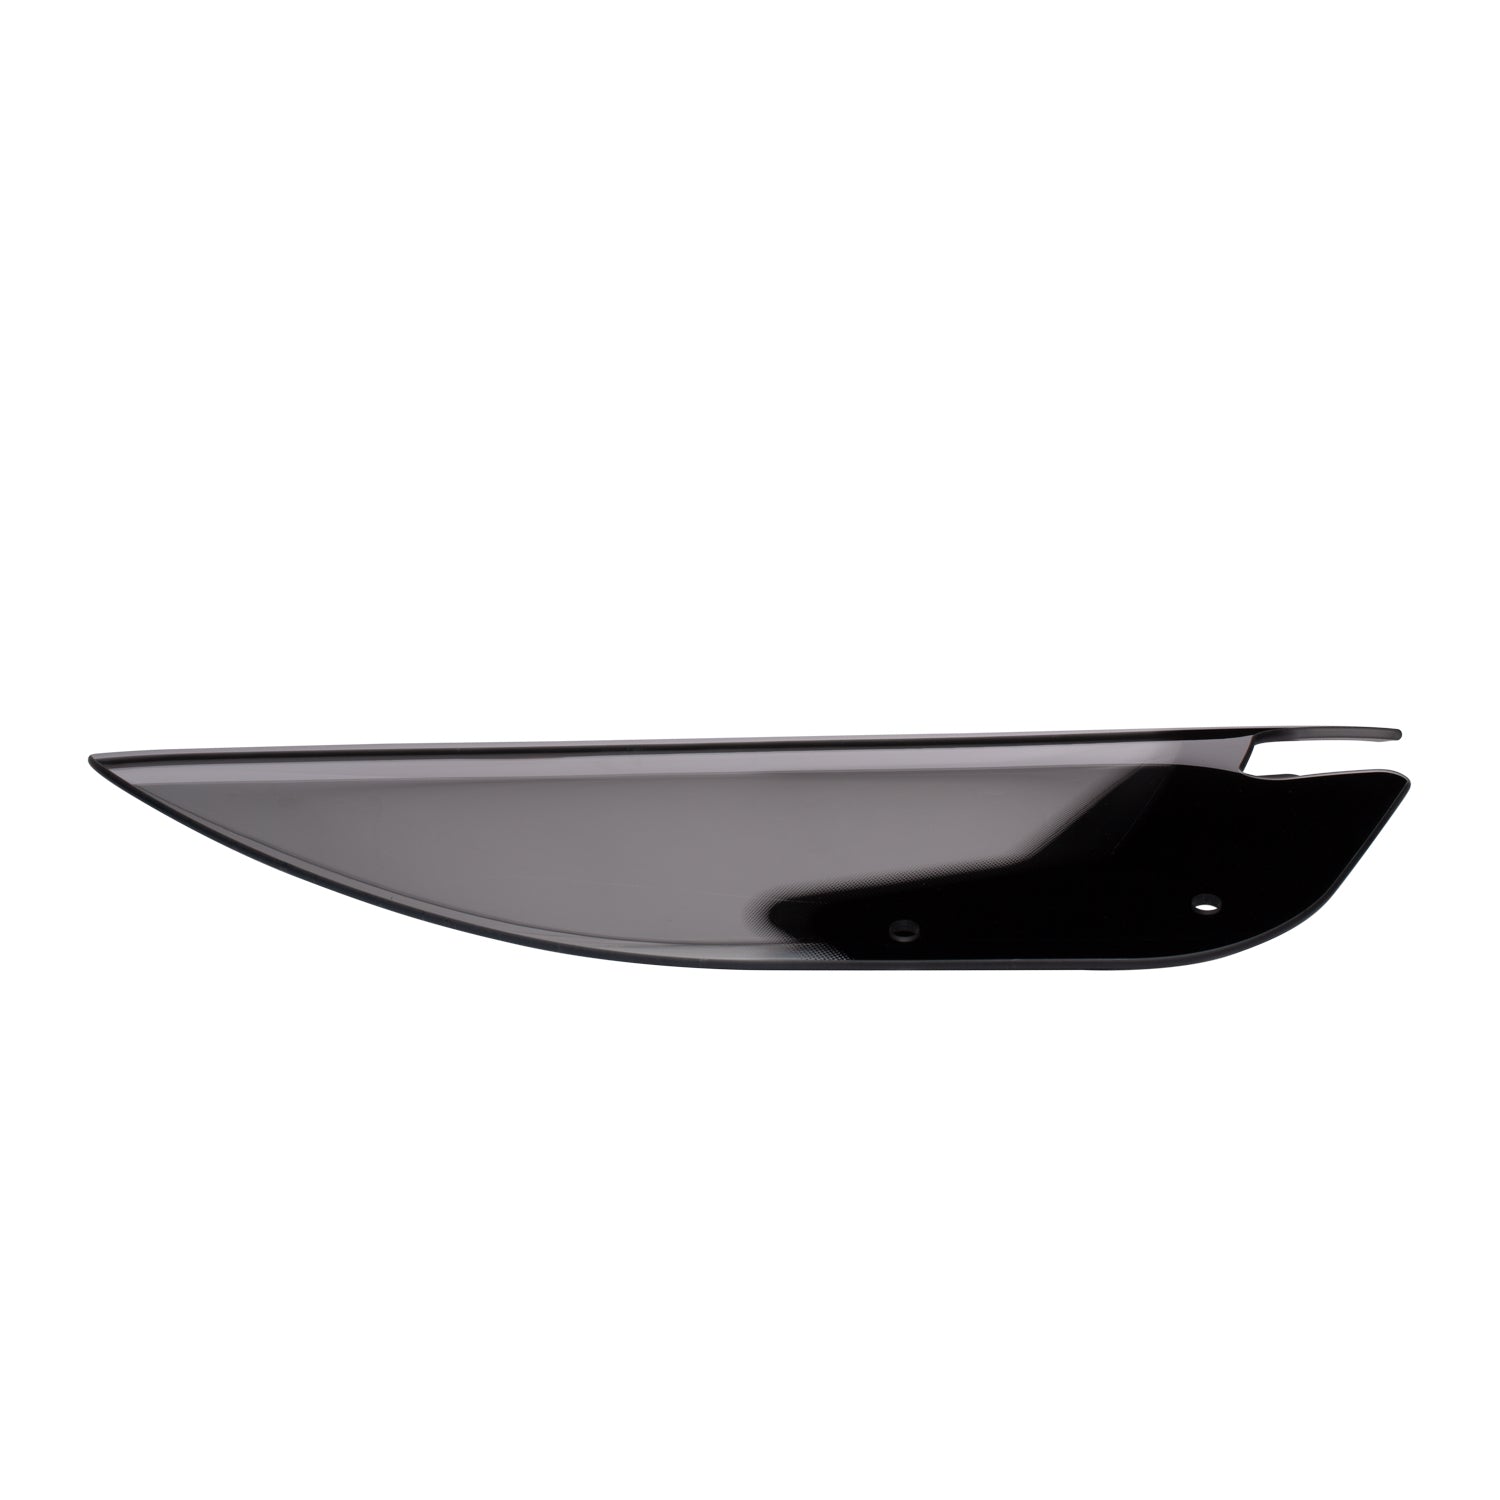 Polycarbonate 21 in. Touring Windshield, Clear